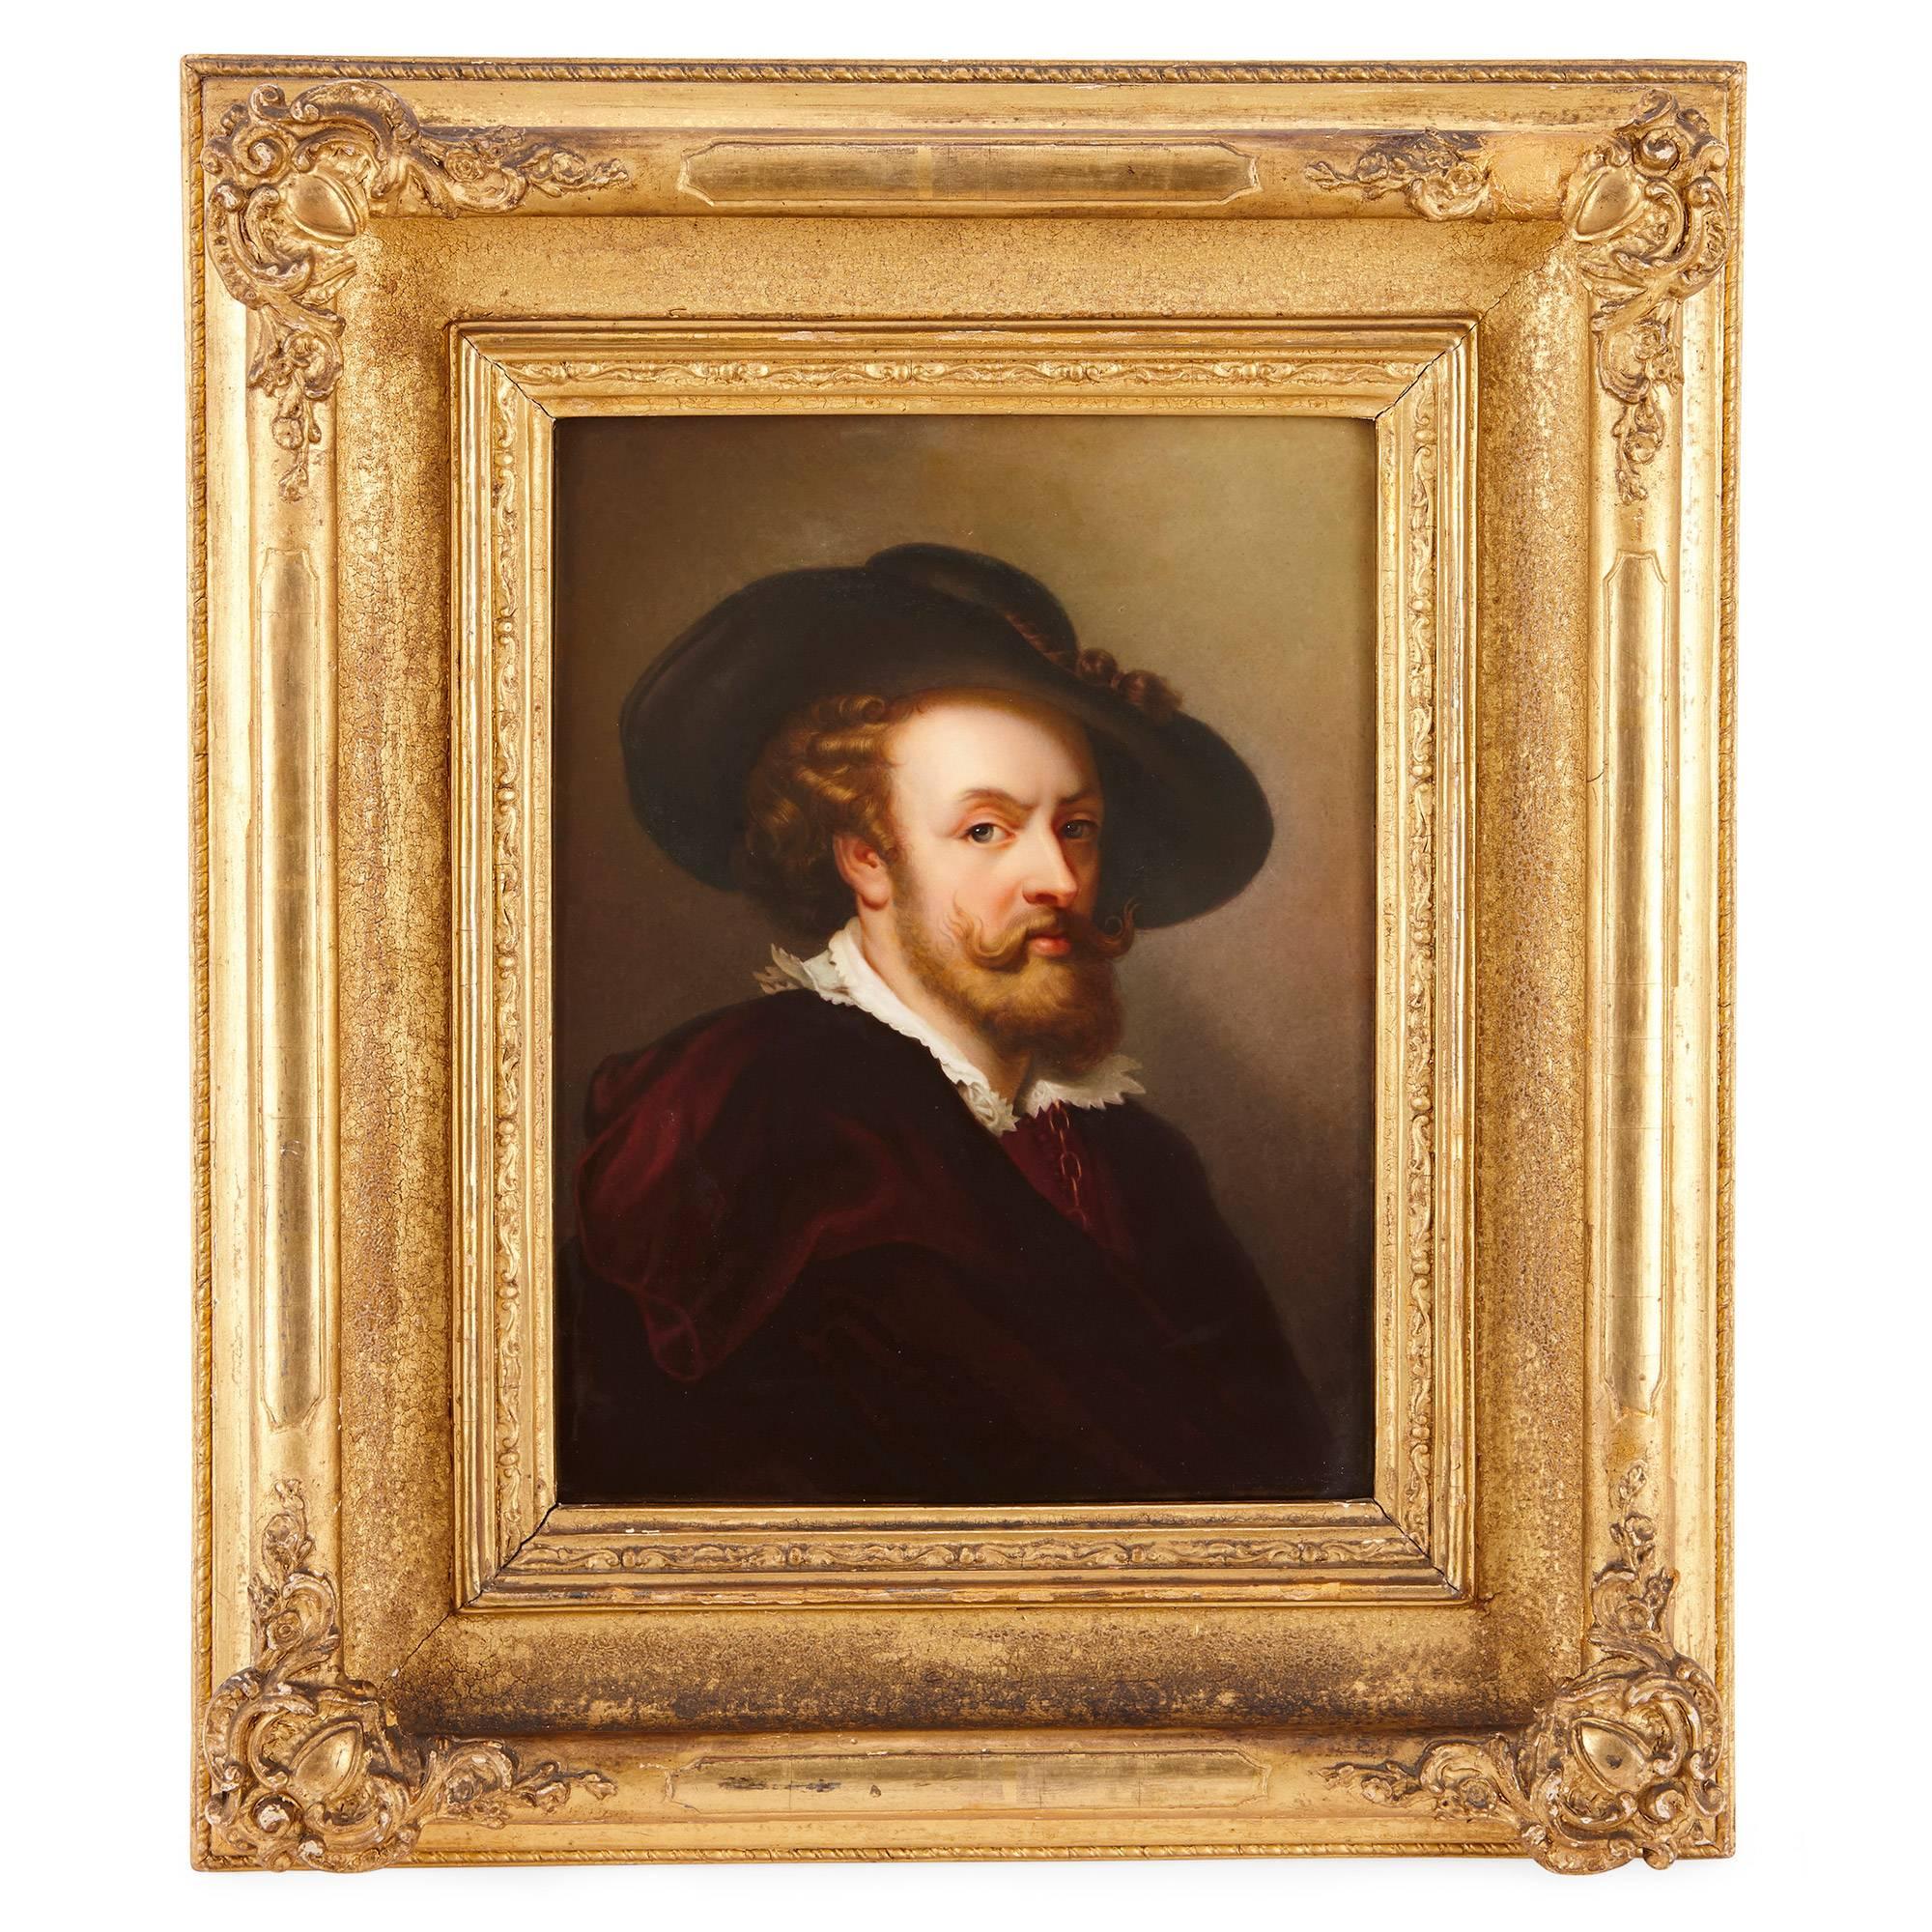 This fine pair of antique porcelain plaques, the work of important Berlin porcelain-makers KPM, have been painted after self-portraits by the renowned Old Master artists Pieter Paul Rubens (1577-1640) and Rembrandt van Rijn (1606-1669). The original